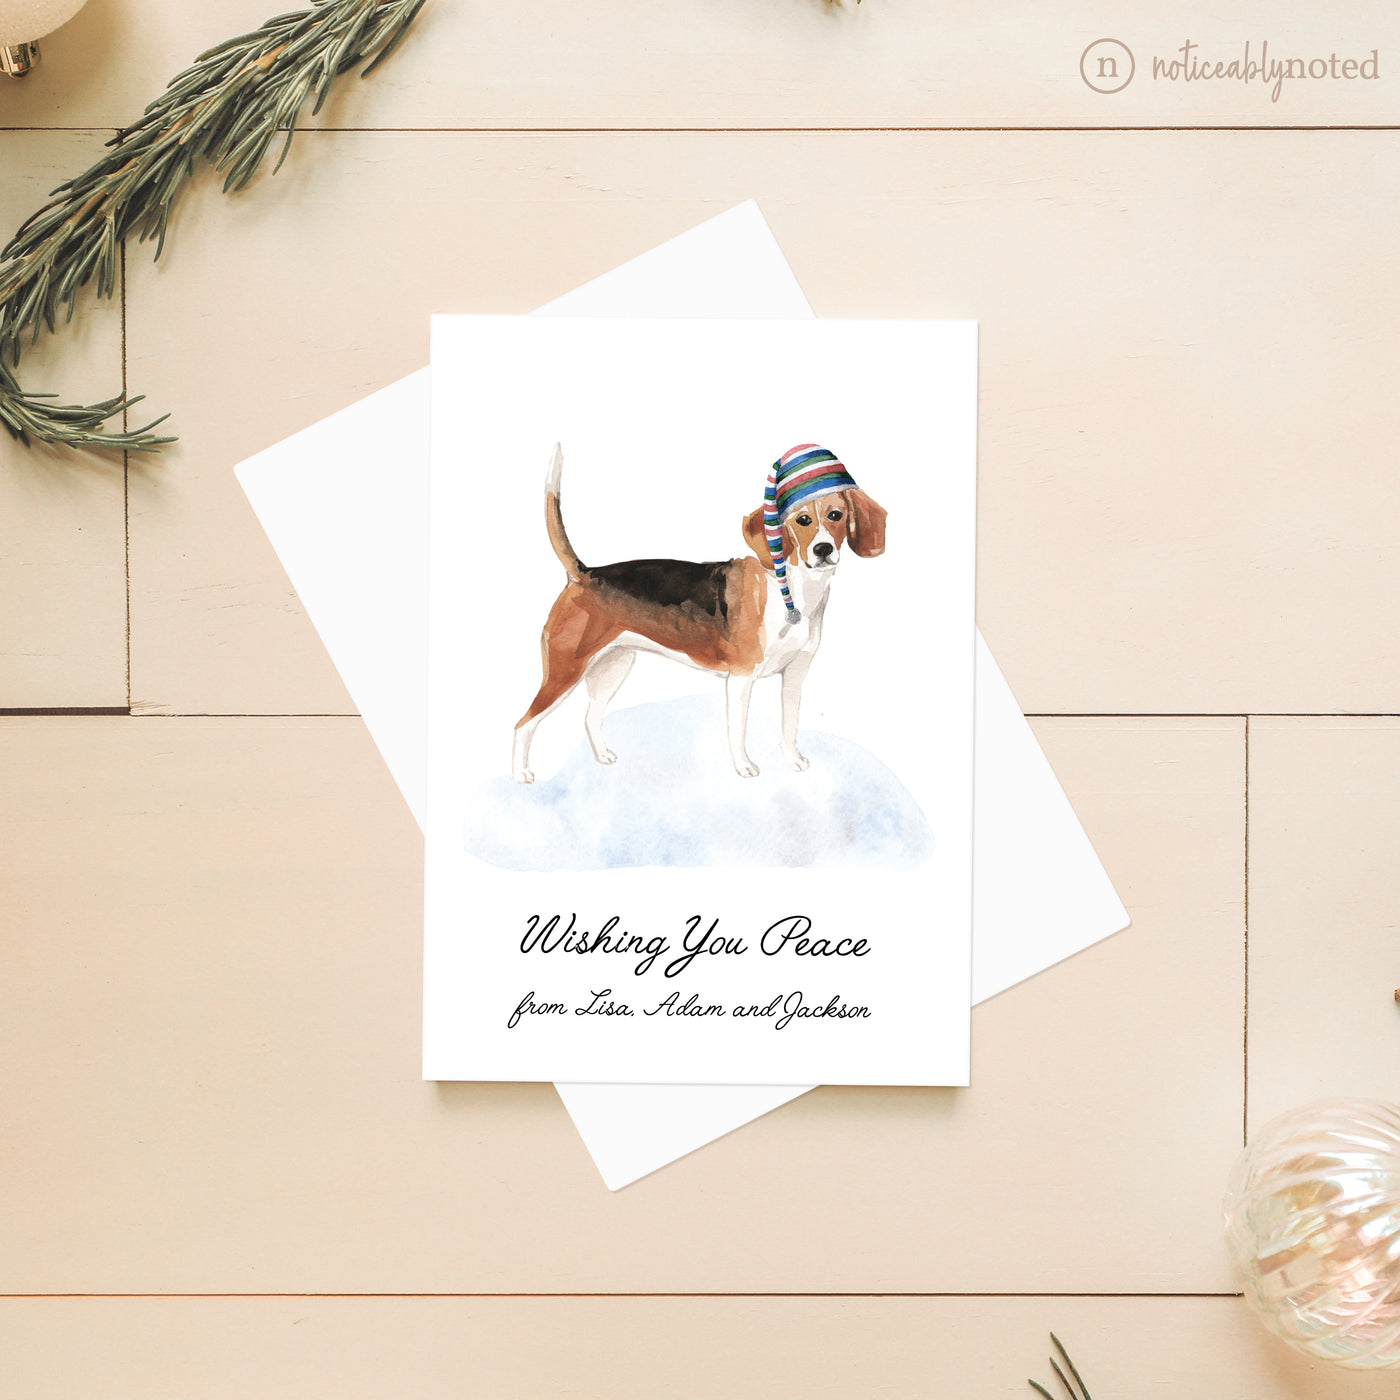 Beagle Dog Christmas Cards | Noticeably Noted